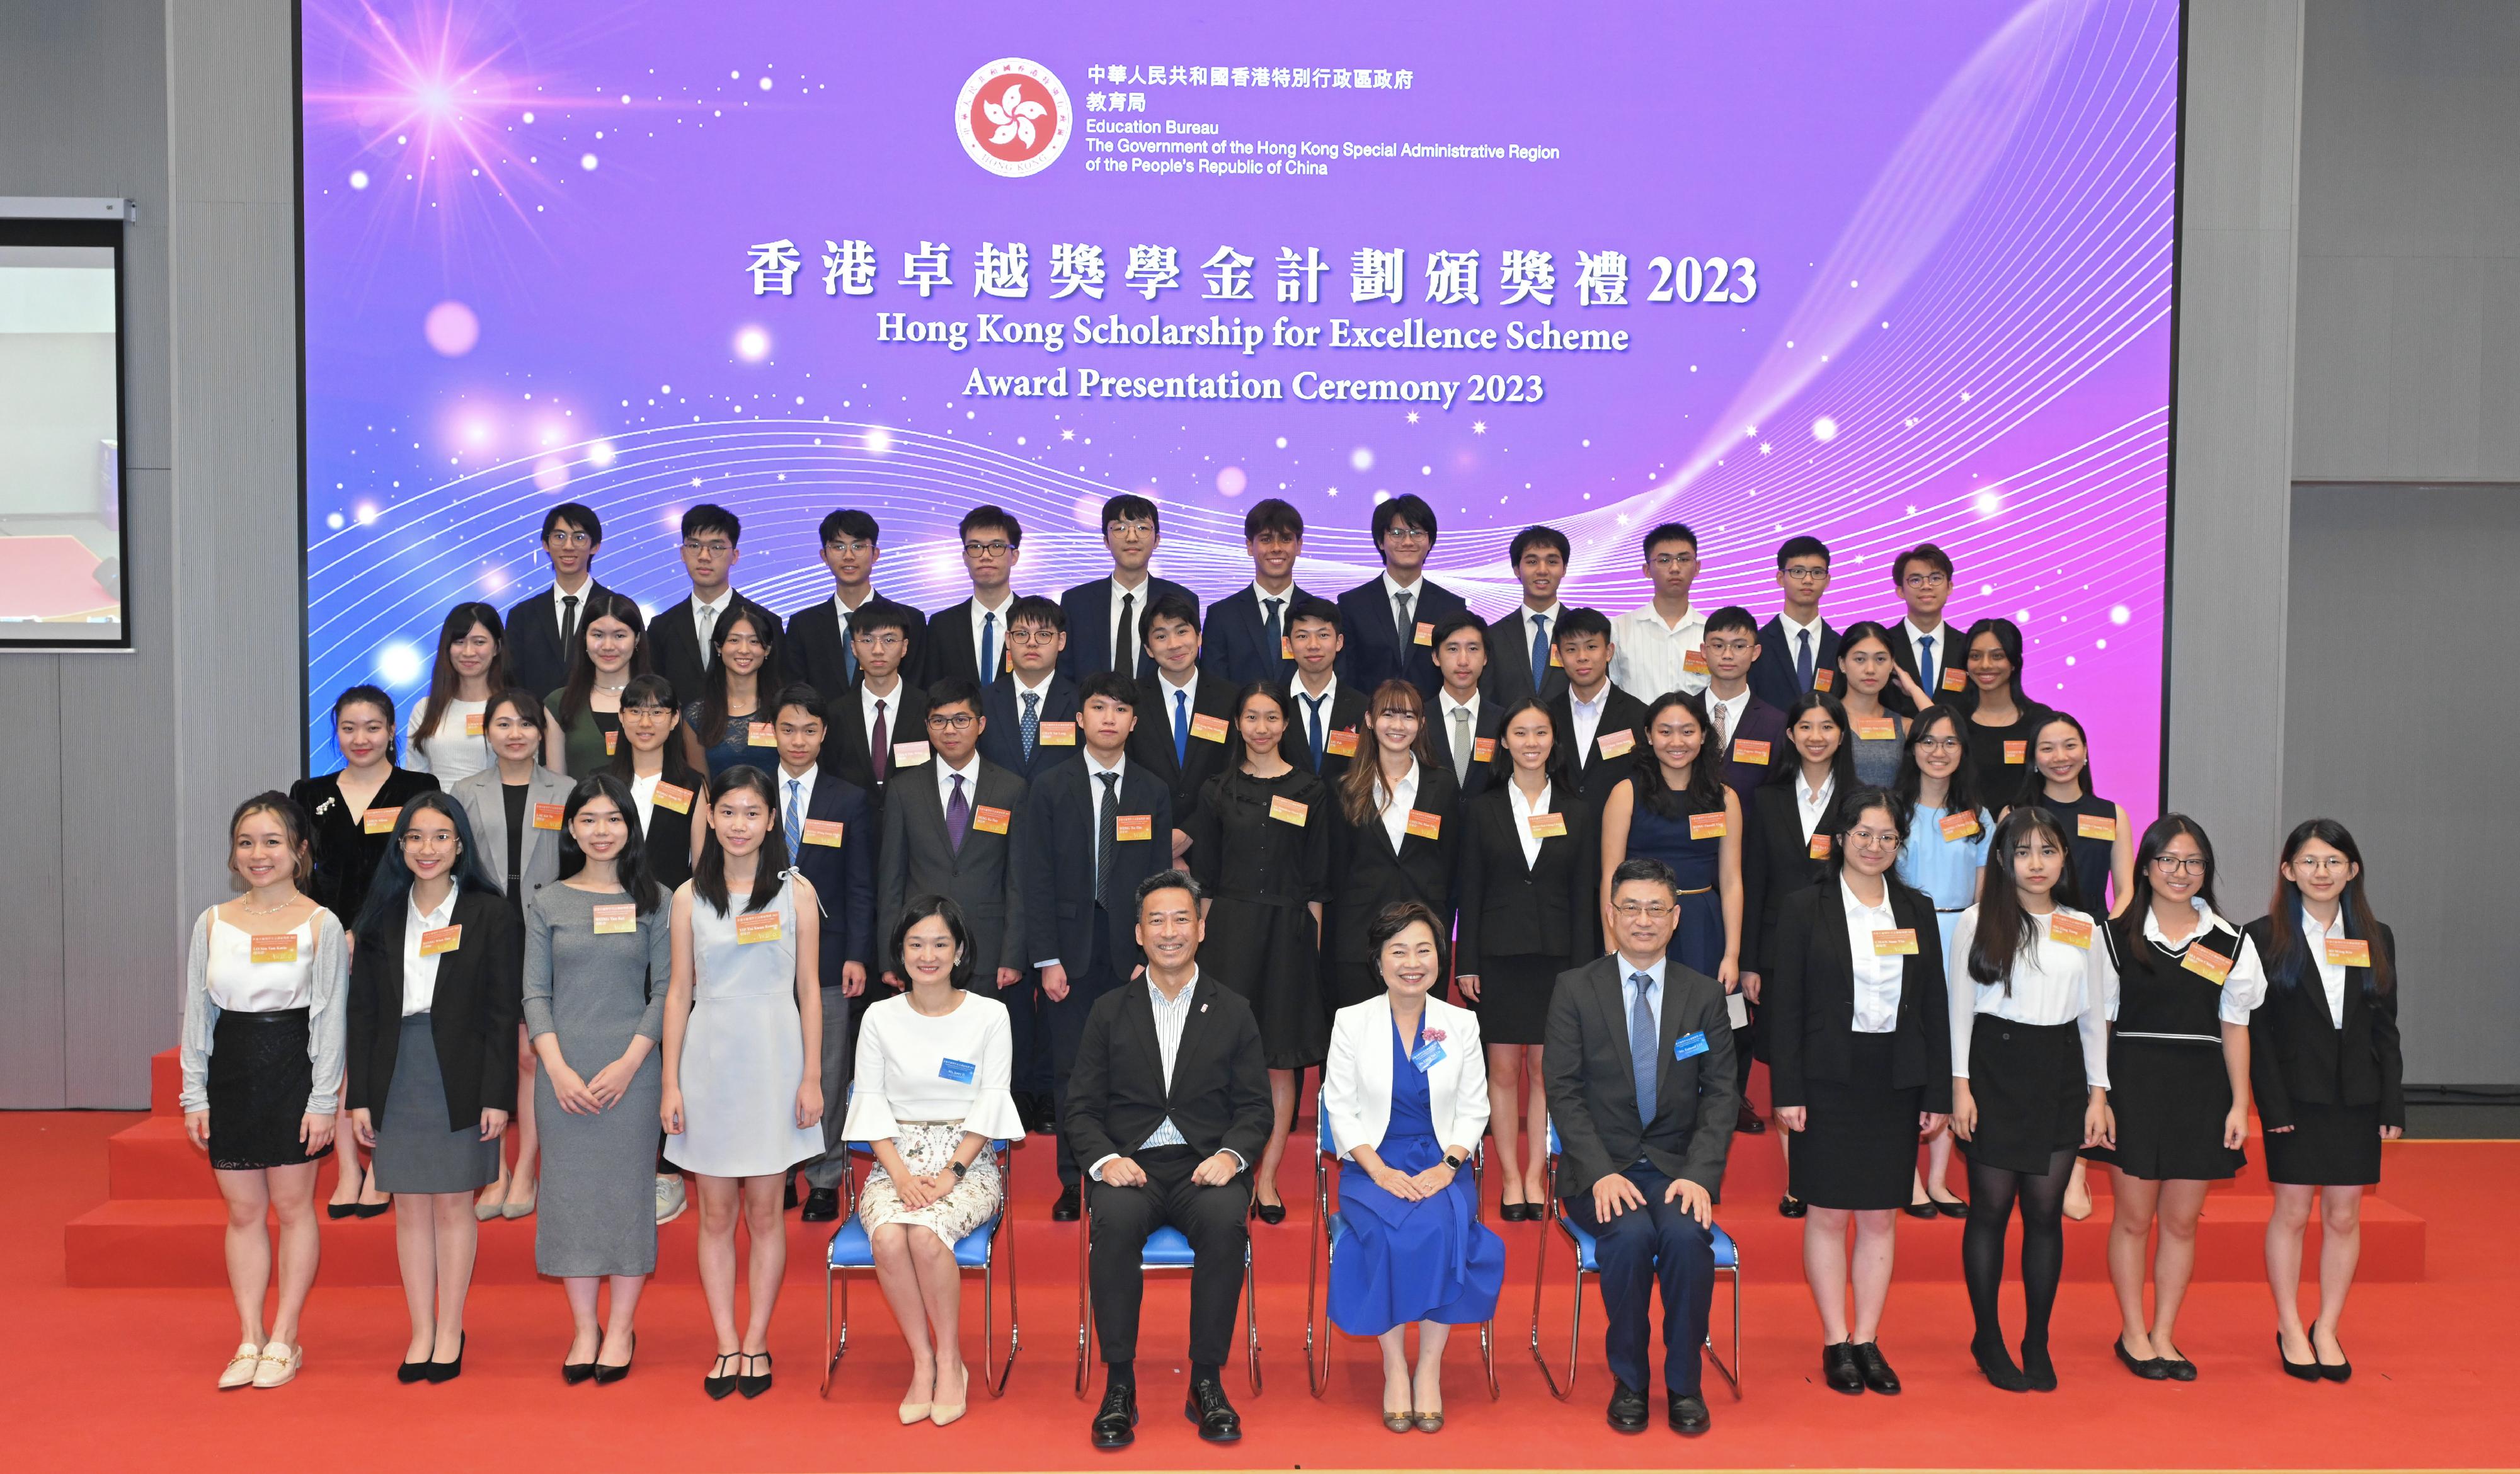 The Secretary for Education, Dr Choi Yuk-lin (first row, sixth right), is pictured with the awardees at the Award Presentation Ceremony 2023 of the Hong Kong Scholarship for Excellence Scheme today (August 25).